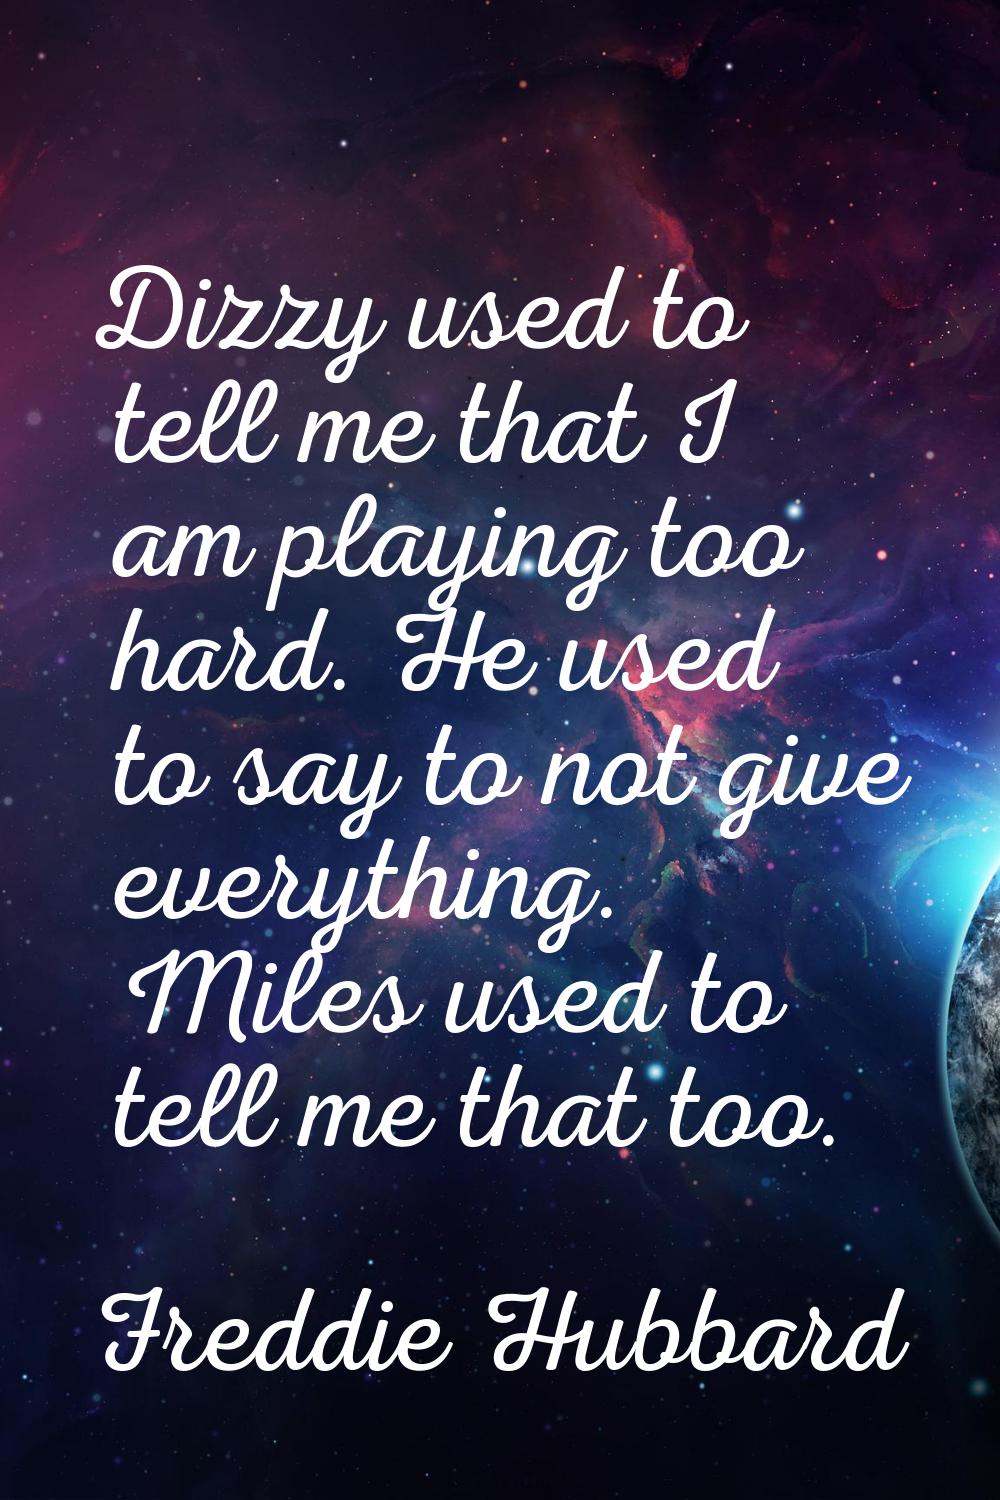 Dizzy used to tell me that I am playing too hard. He used to say to not give everything. Miles used